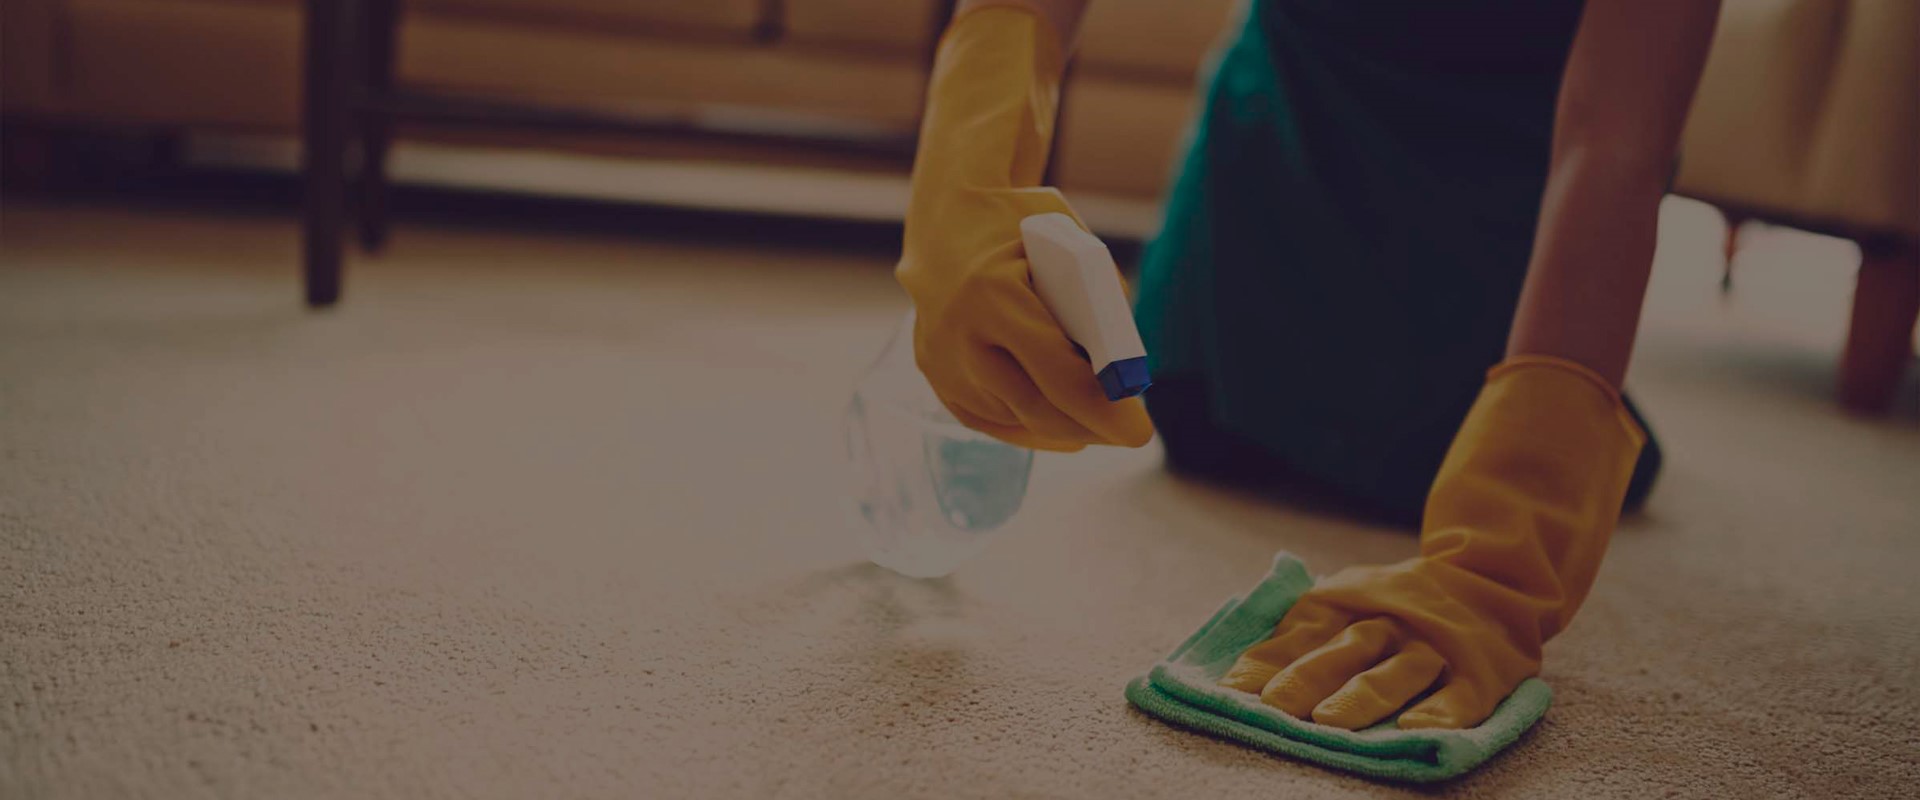 Professional carpet cleaning agency